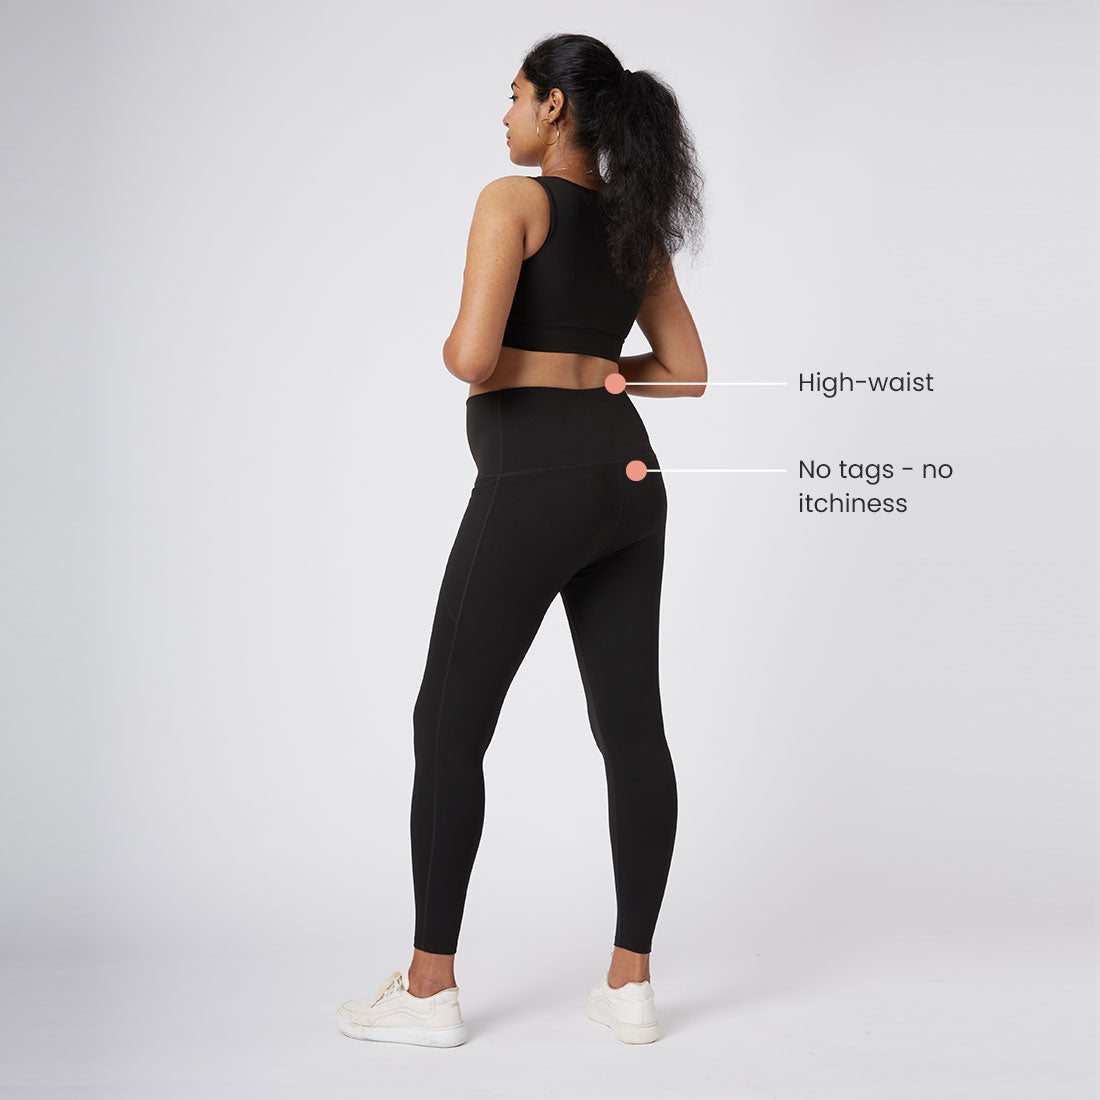 Iseasoo Women's Capri Maternity Leggings Over The Belly Pregnancy Yoga Pants  Active Wear Buttery Soft Workout Leggings S : Buy Online at Best Price in  KSA - Souq is now : Fashion